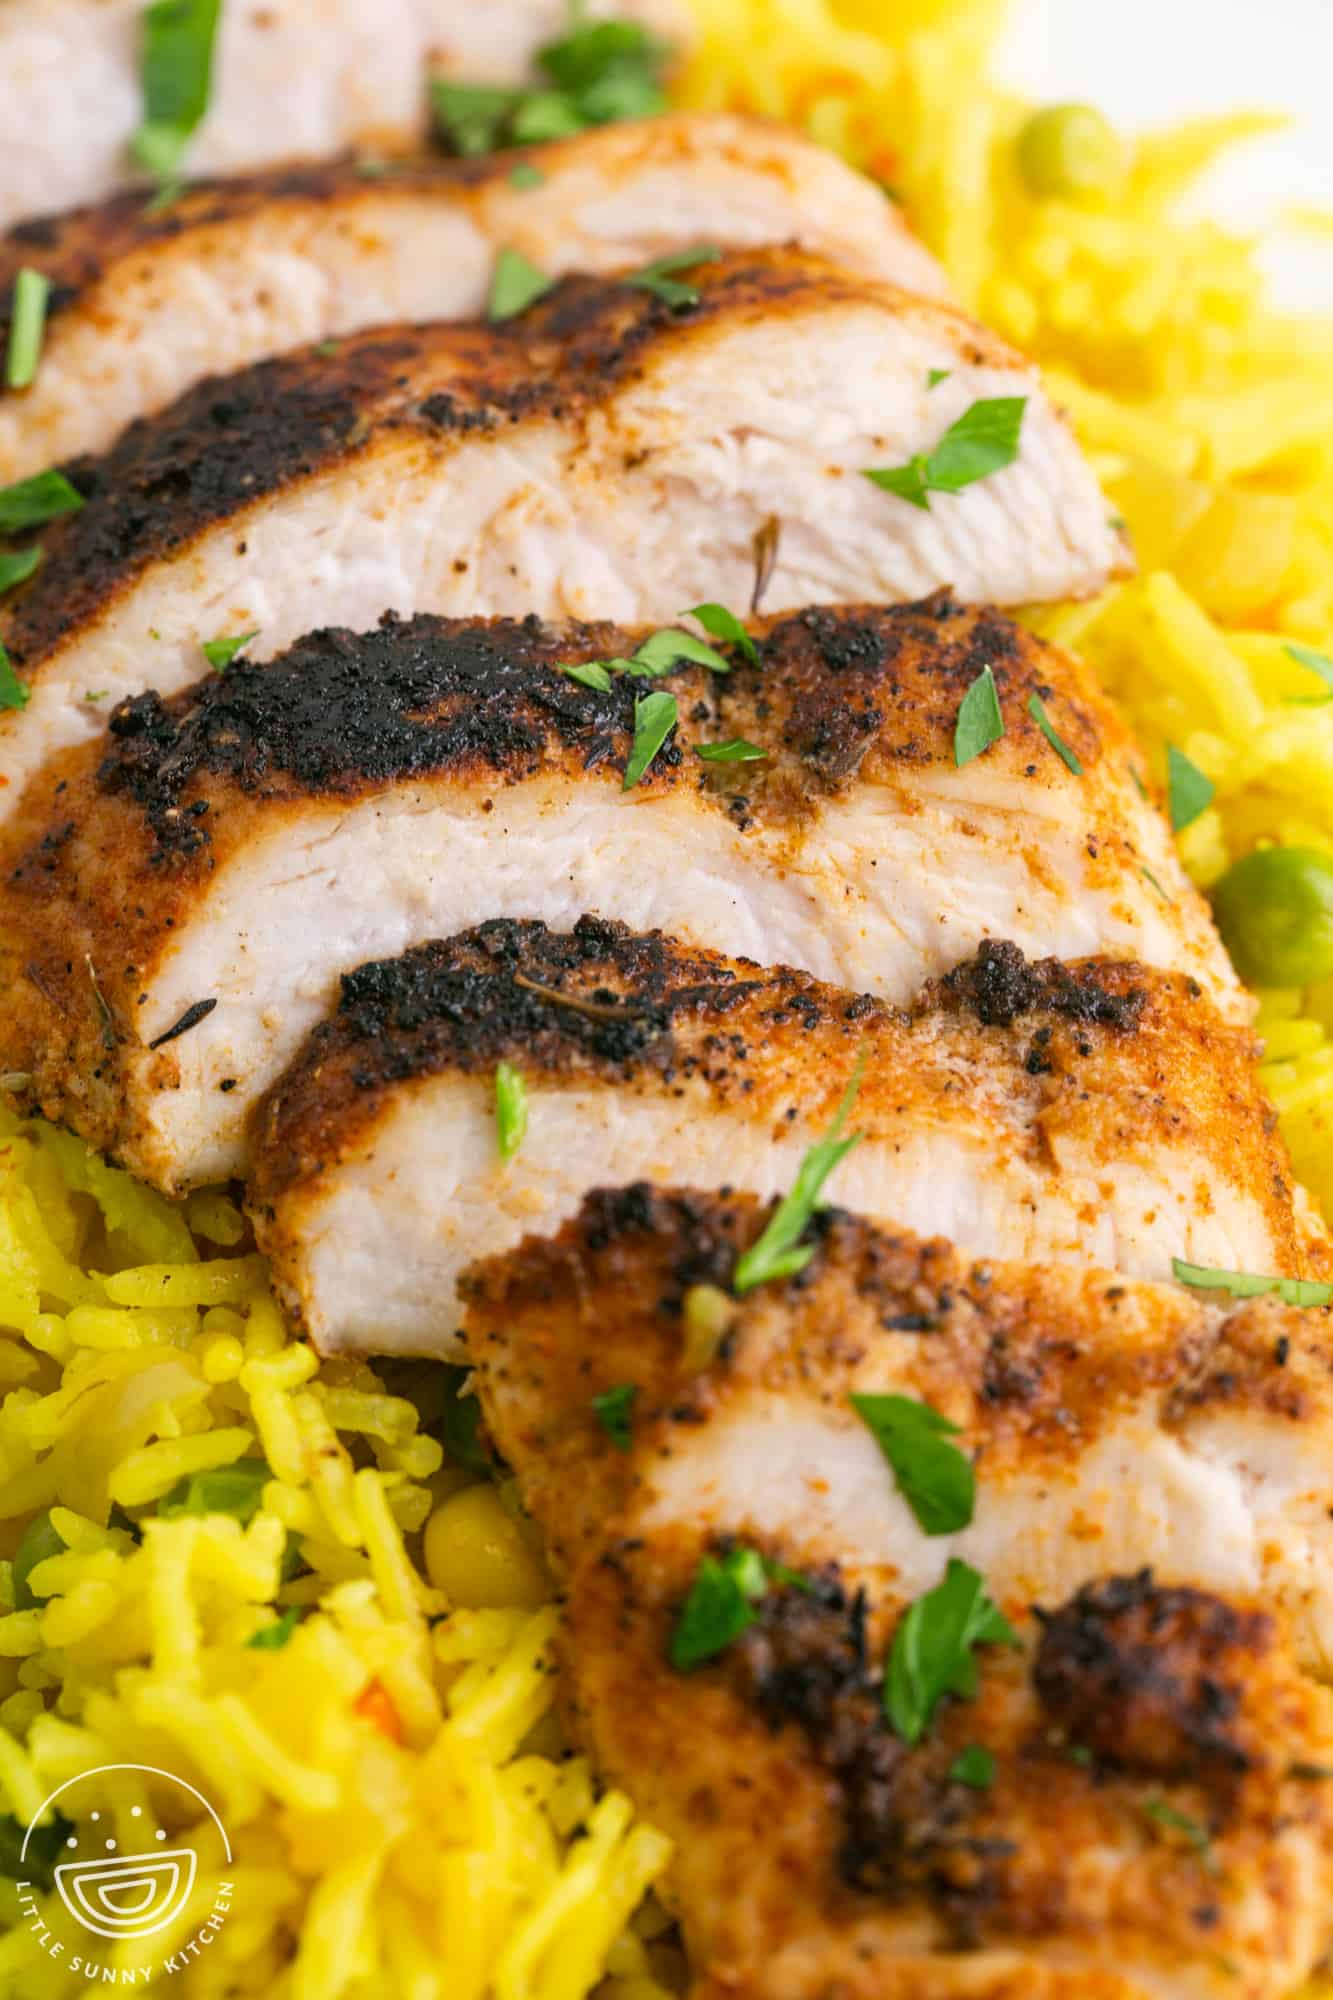 Sliced blackened chicken served over yellow rice